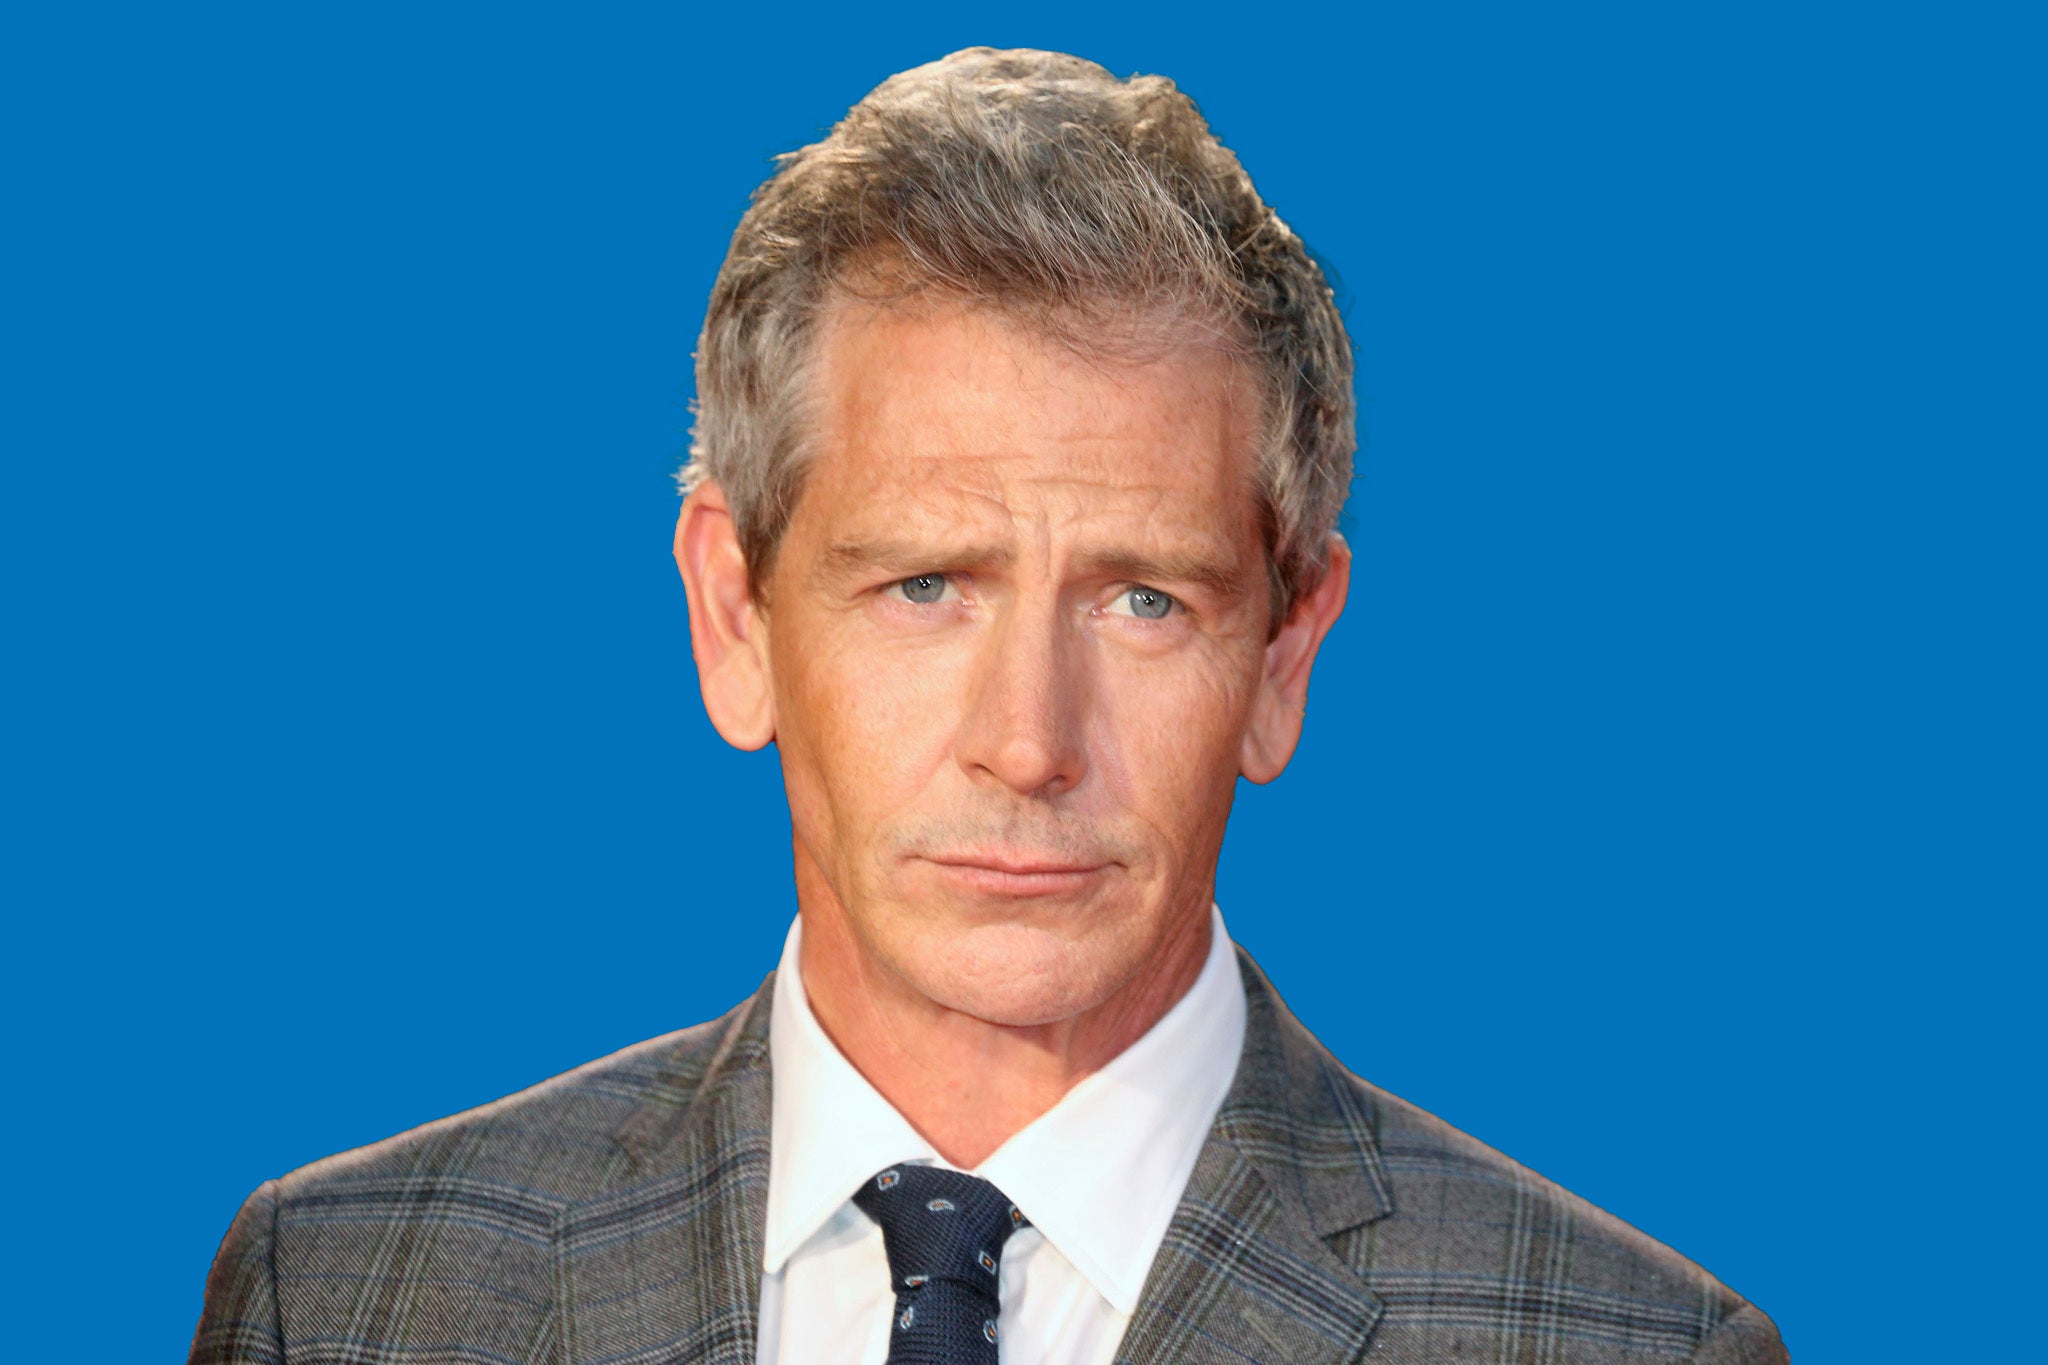 Ben Mendelsohn on playing Christian Dior and feeling insecure: 'I